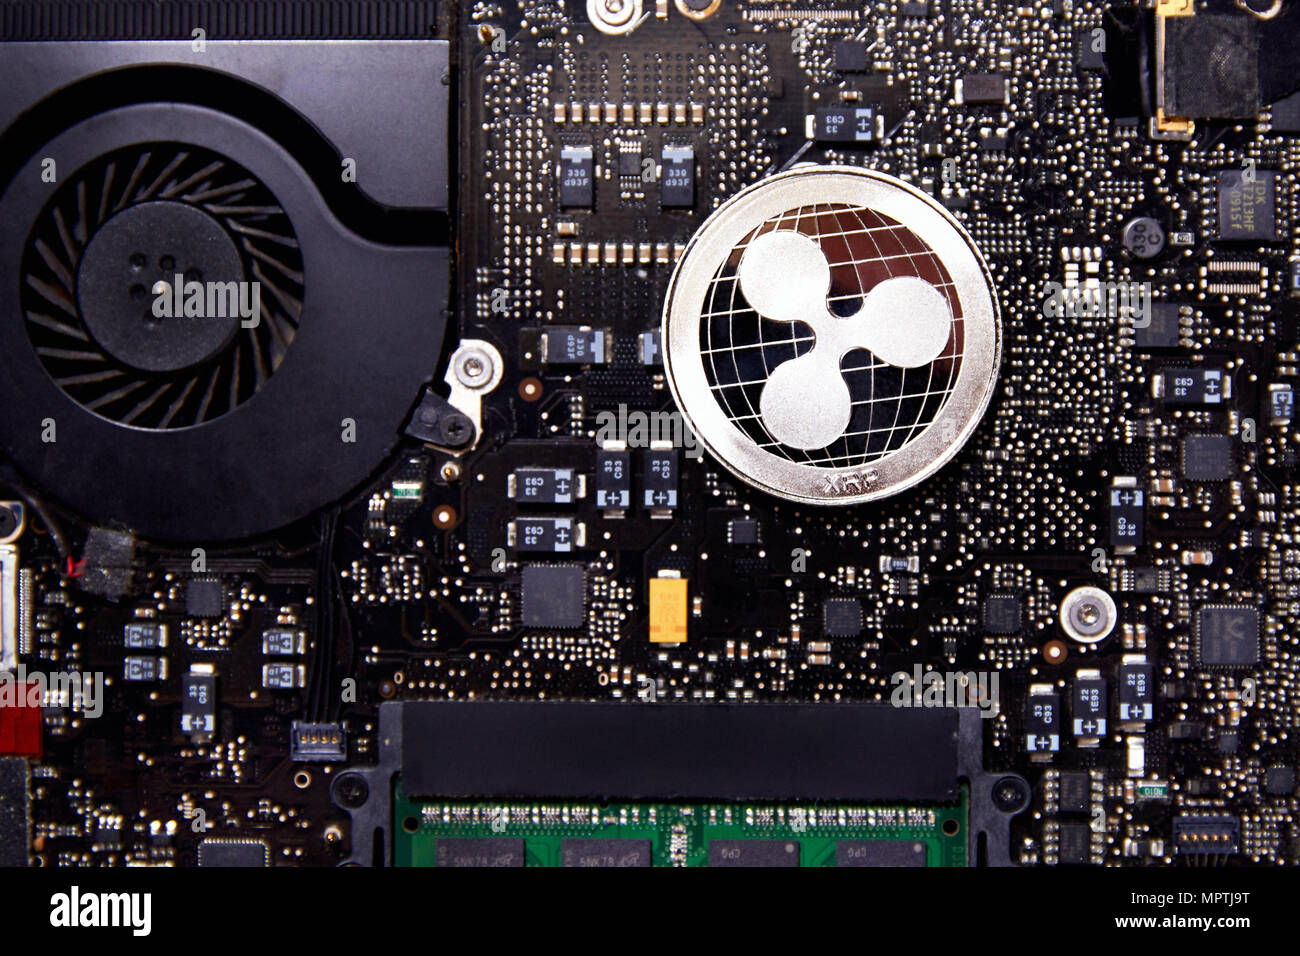 A Ripple physical coin sitting on a computer motherboard with a fan and RAM. real-time gross settlement system, exchange and remittance network Stock Photo